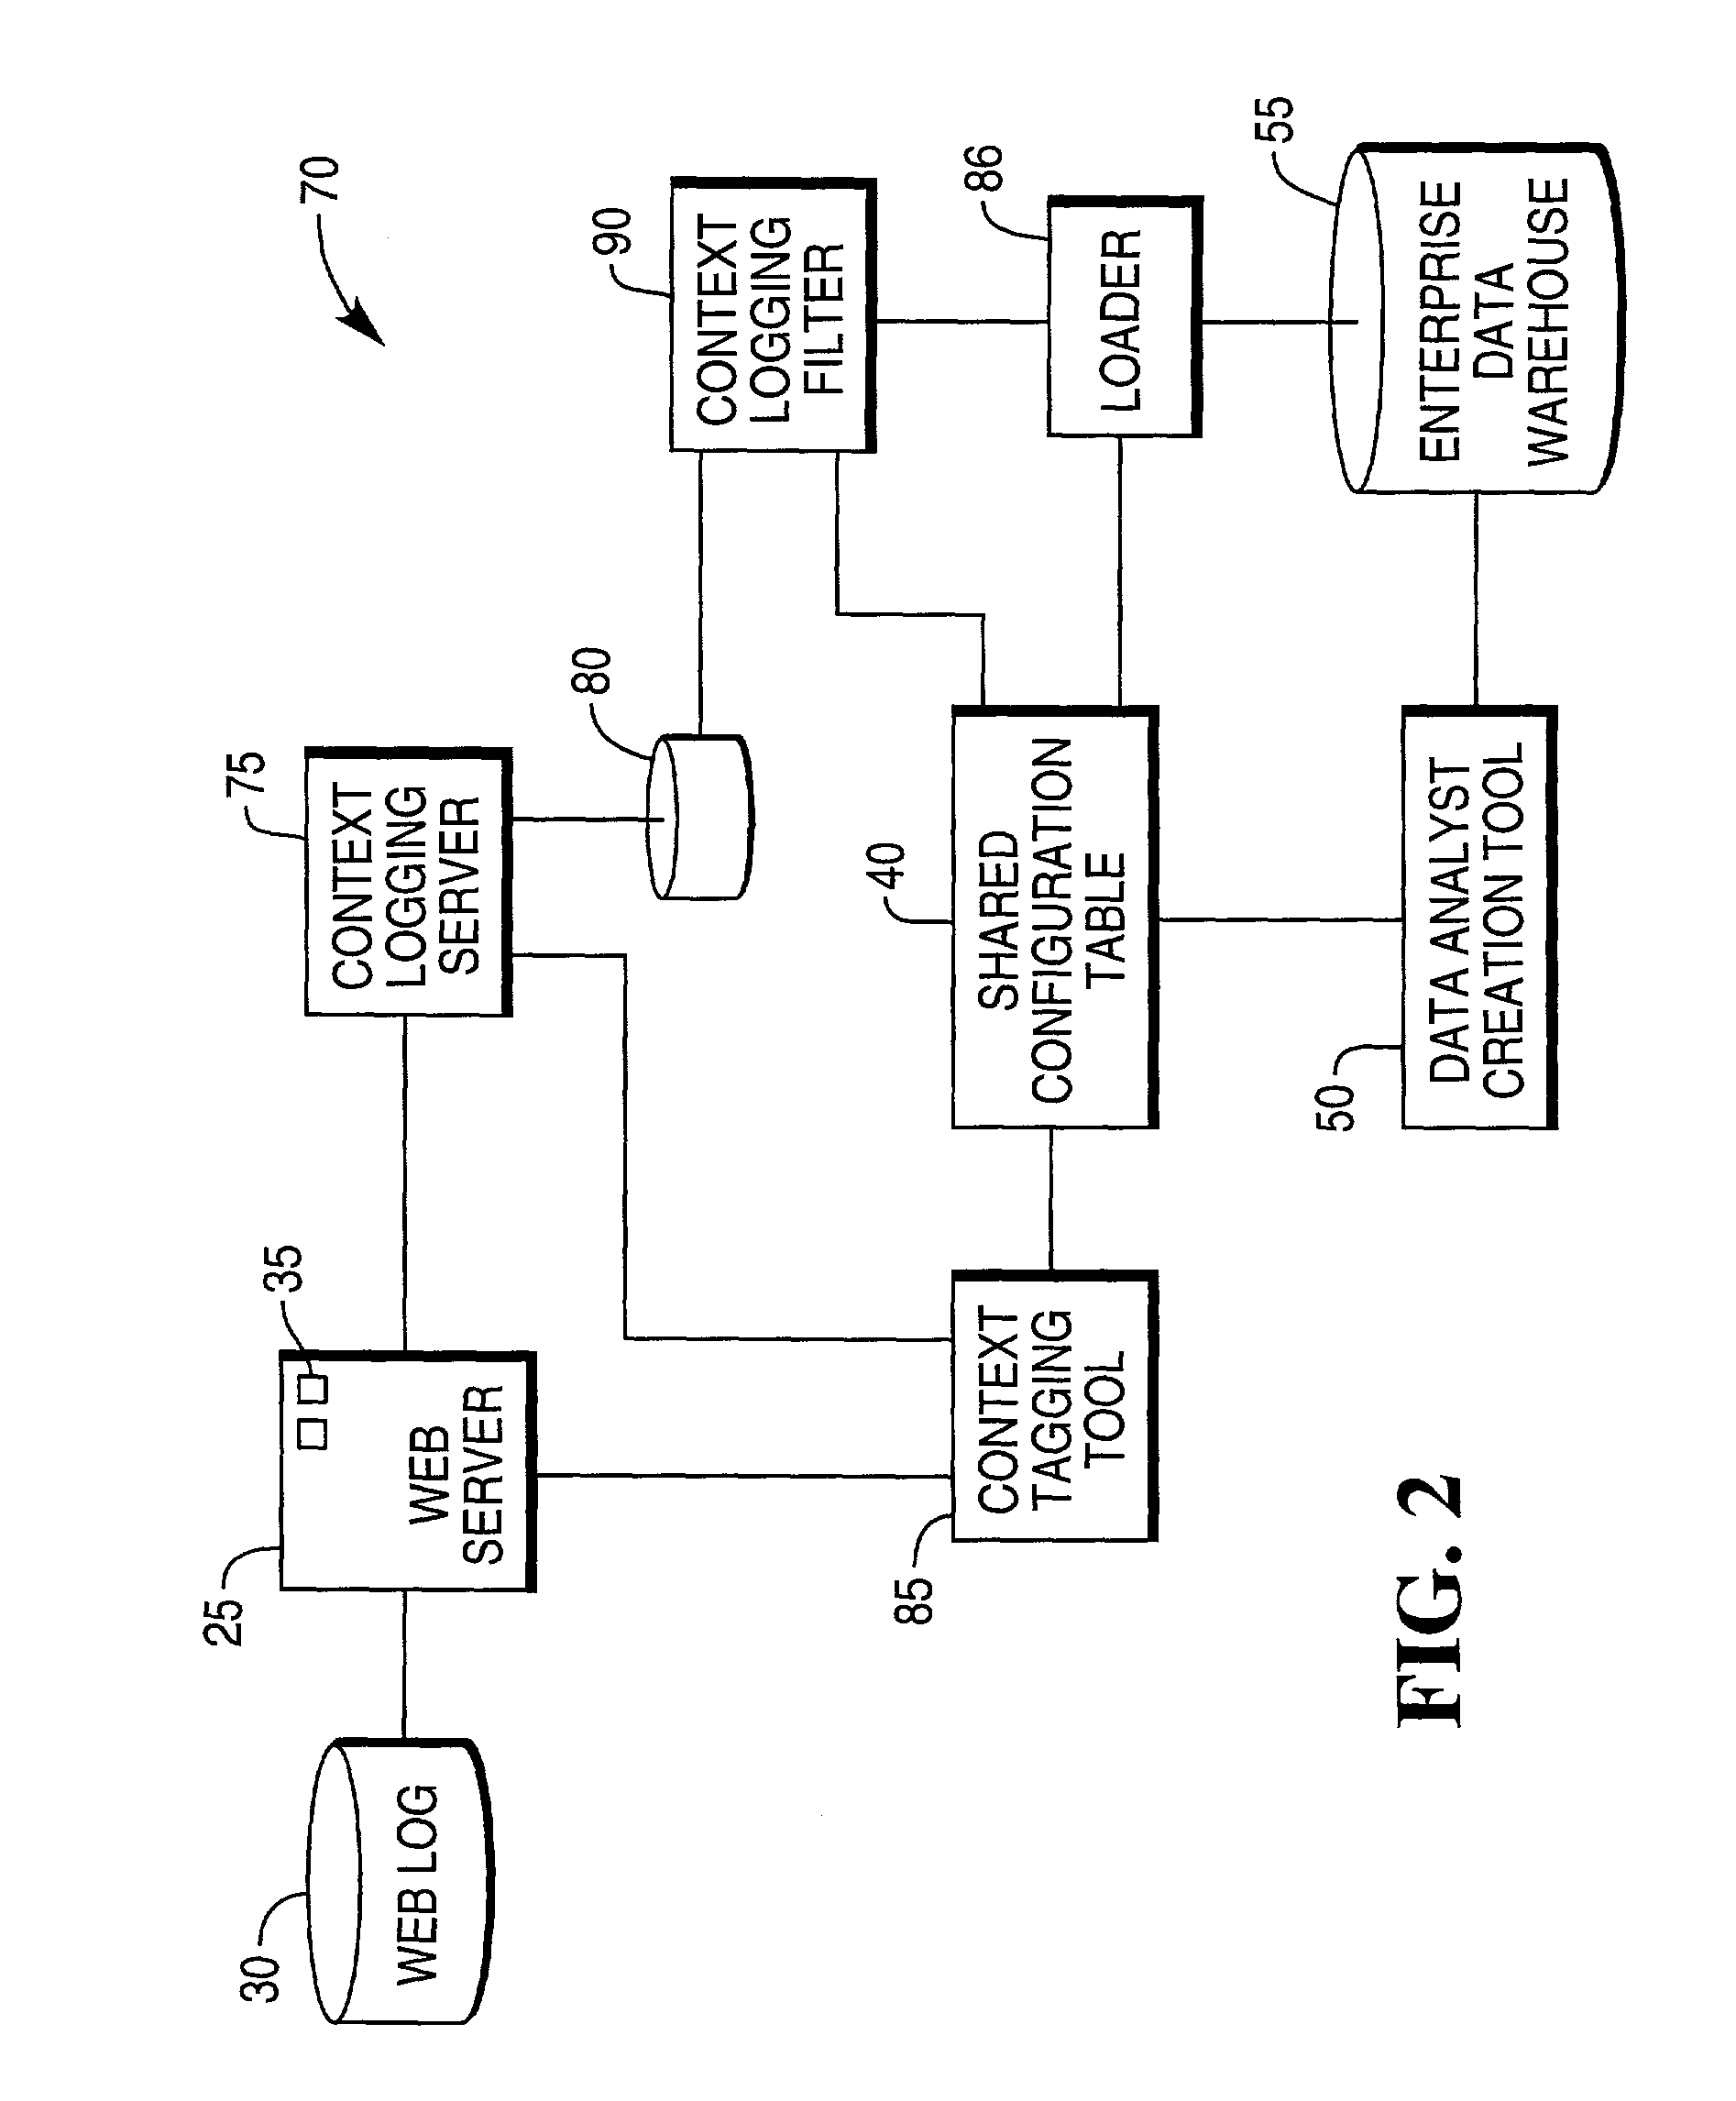 System for capturing a business context of a user's interaction with a website and method for the same